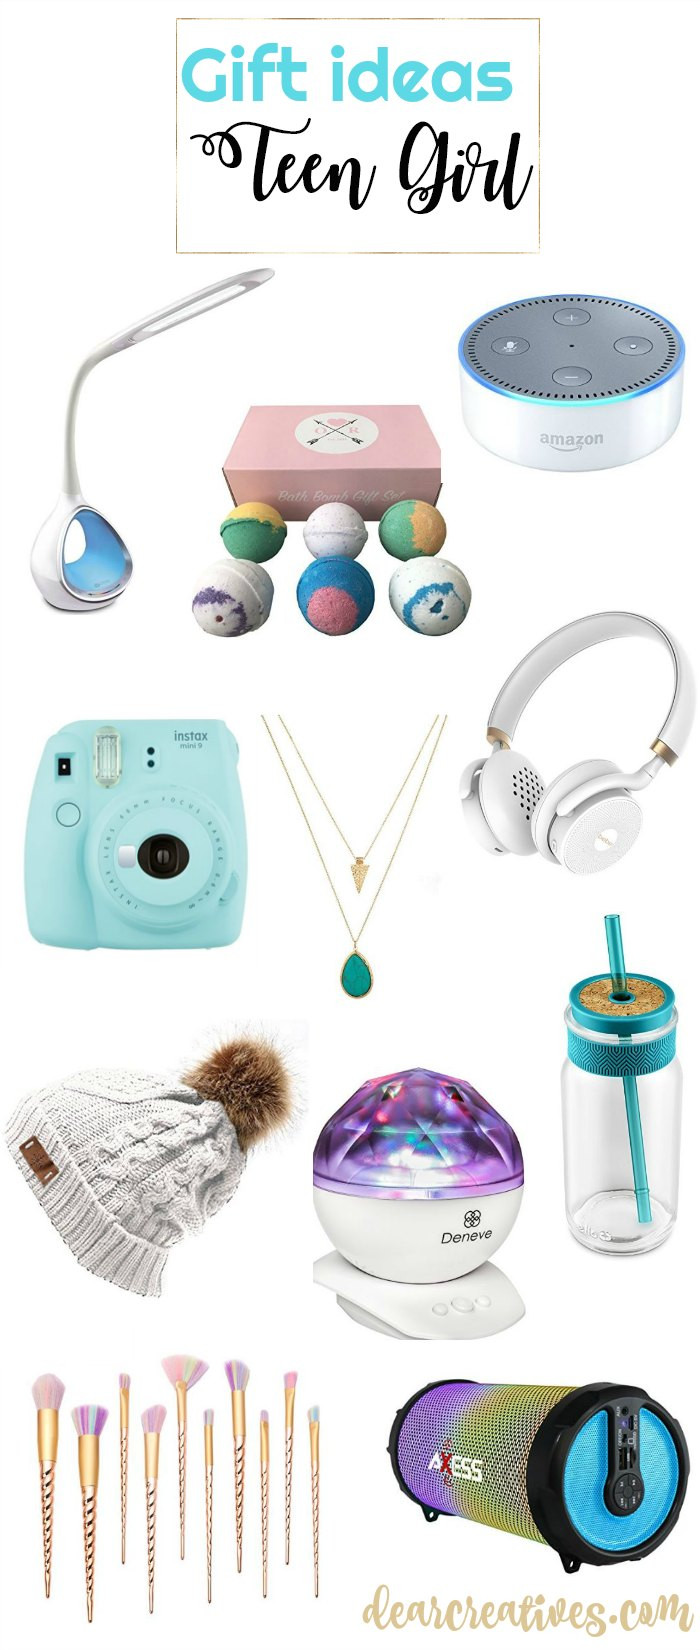 Unique Gift Ideas Girlfriend
 Gift Ideas for Teen Girls This Gift Guide Packed Full of